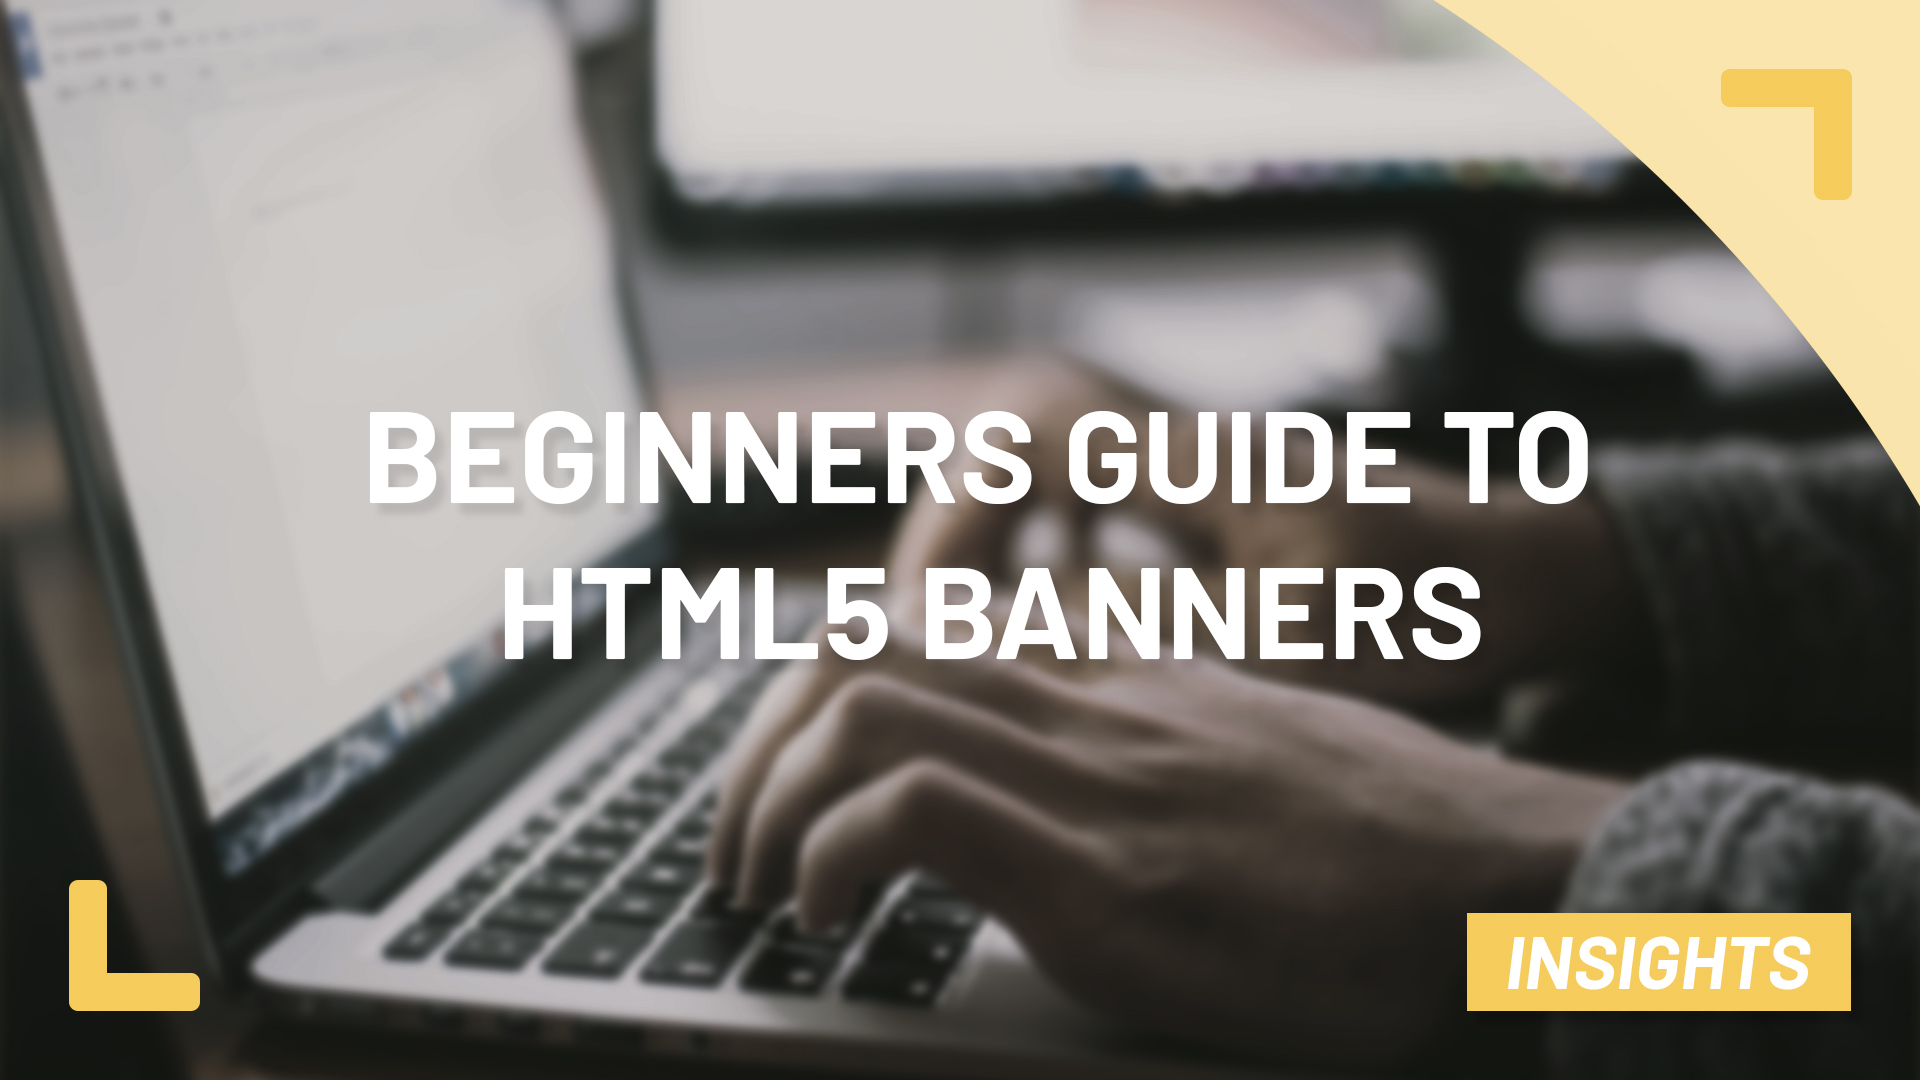 A complete beginner’s guide to HTML5 banners - Zuuvi